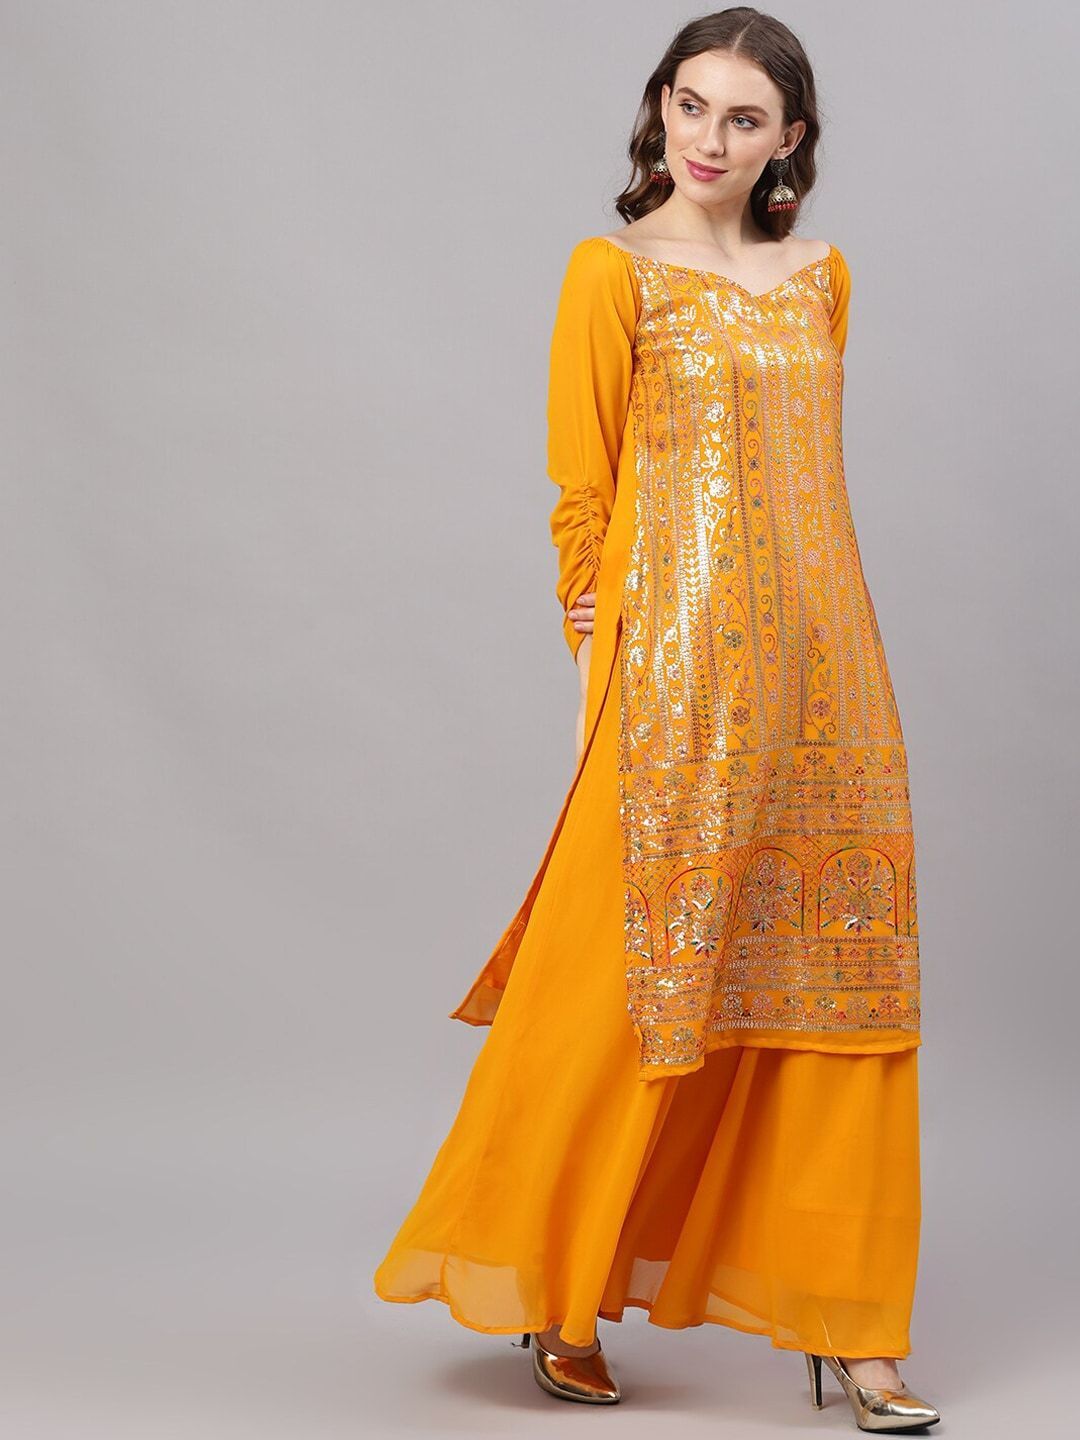 Women's  Yellow & Gold-Toned Embroidered Made To Measure Kurta with Palazzos - AKS